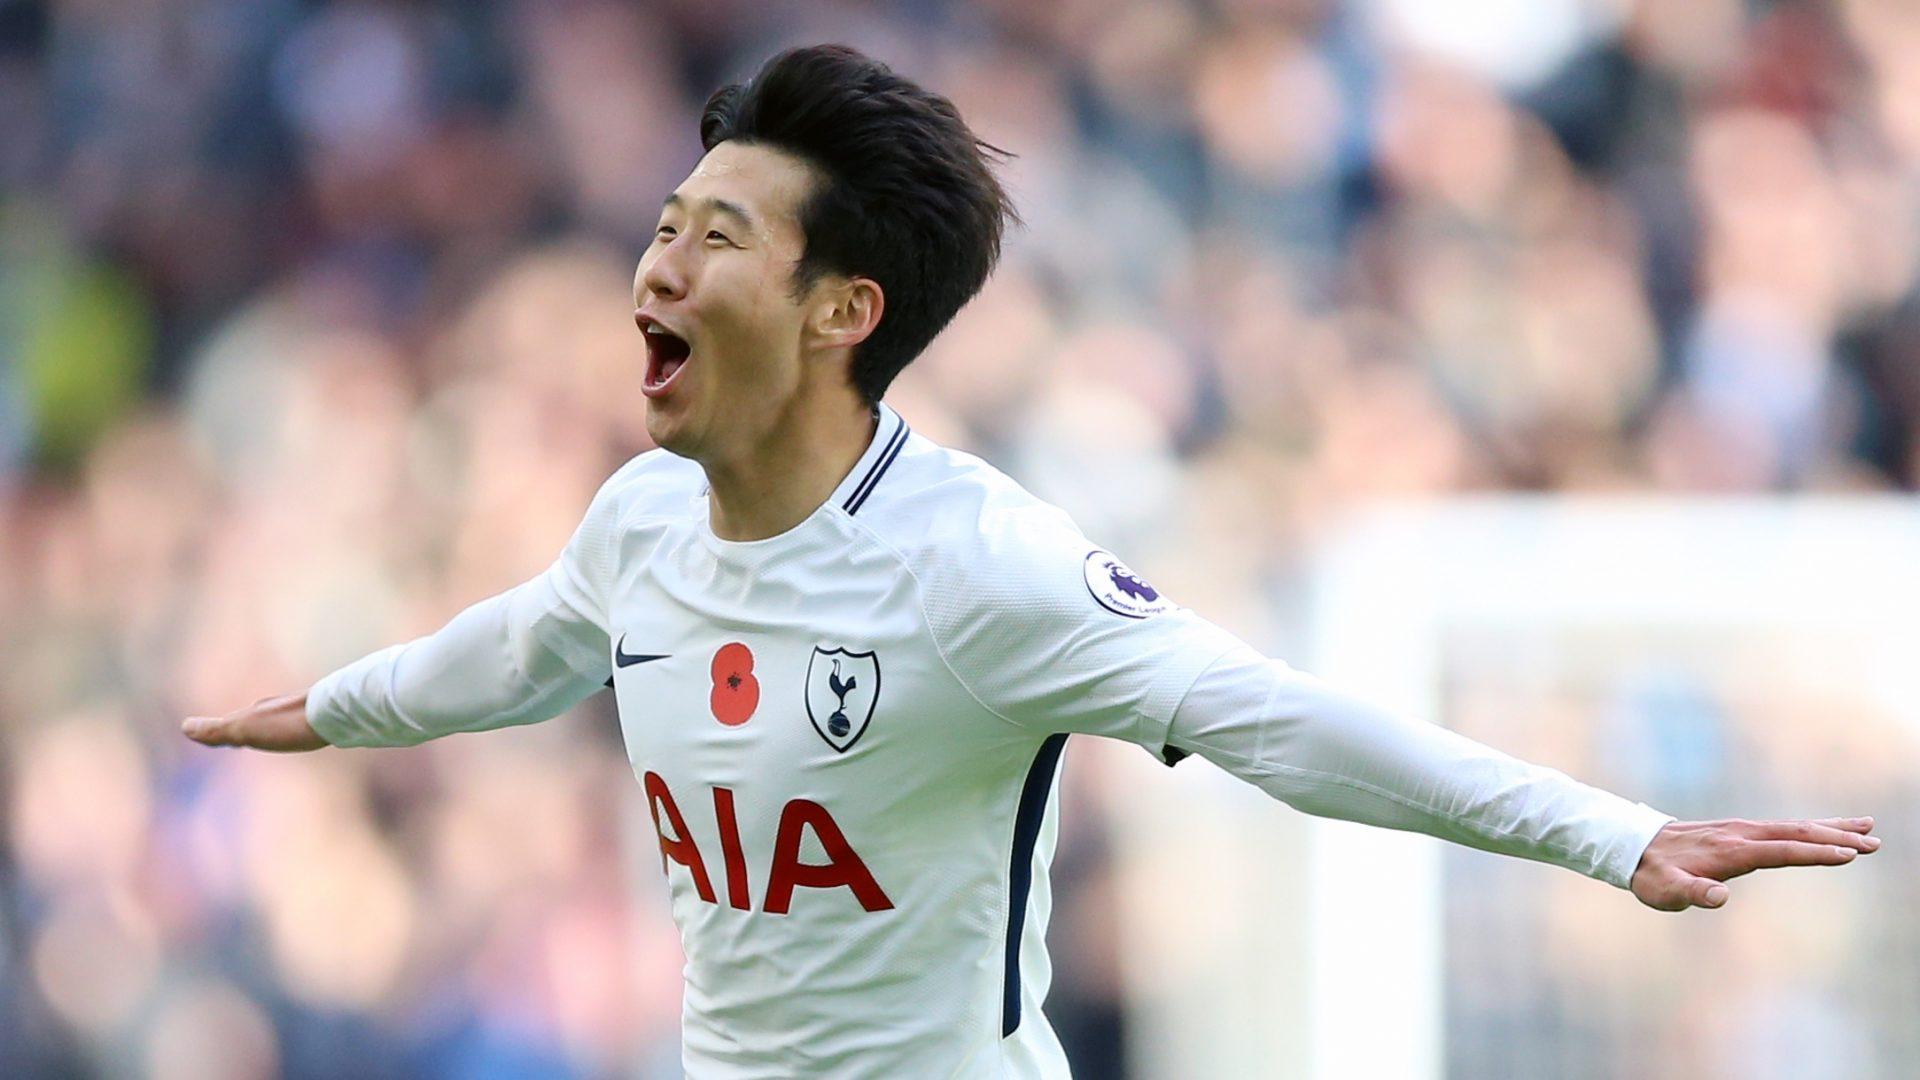 Unconvincing Tottenham scrape past Crystal Palace thanks to Son